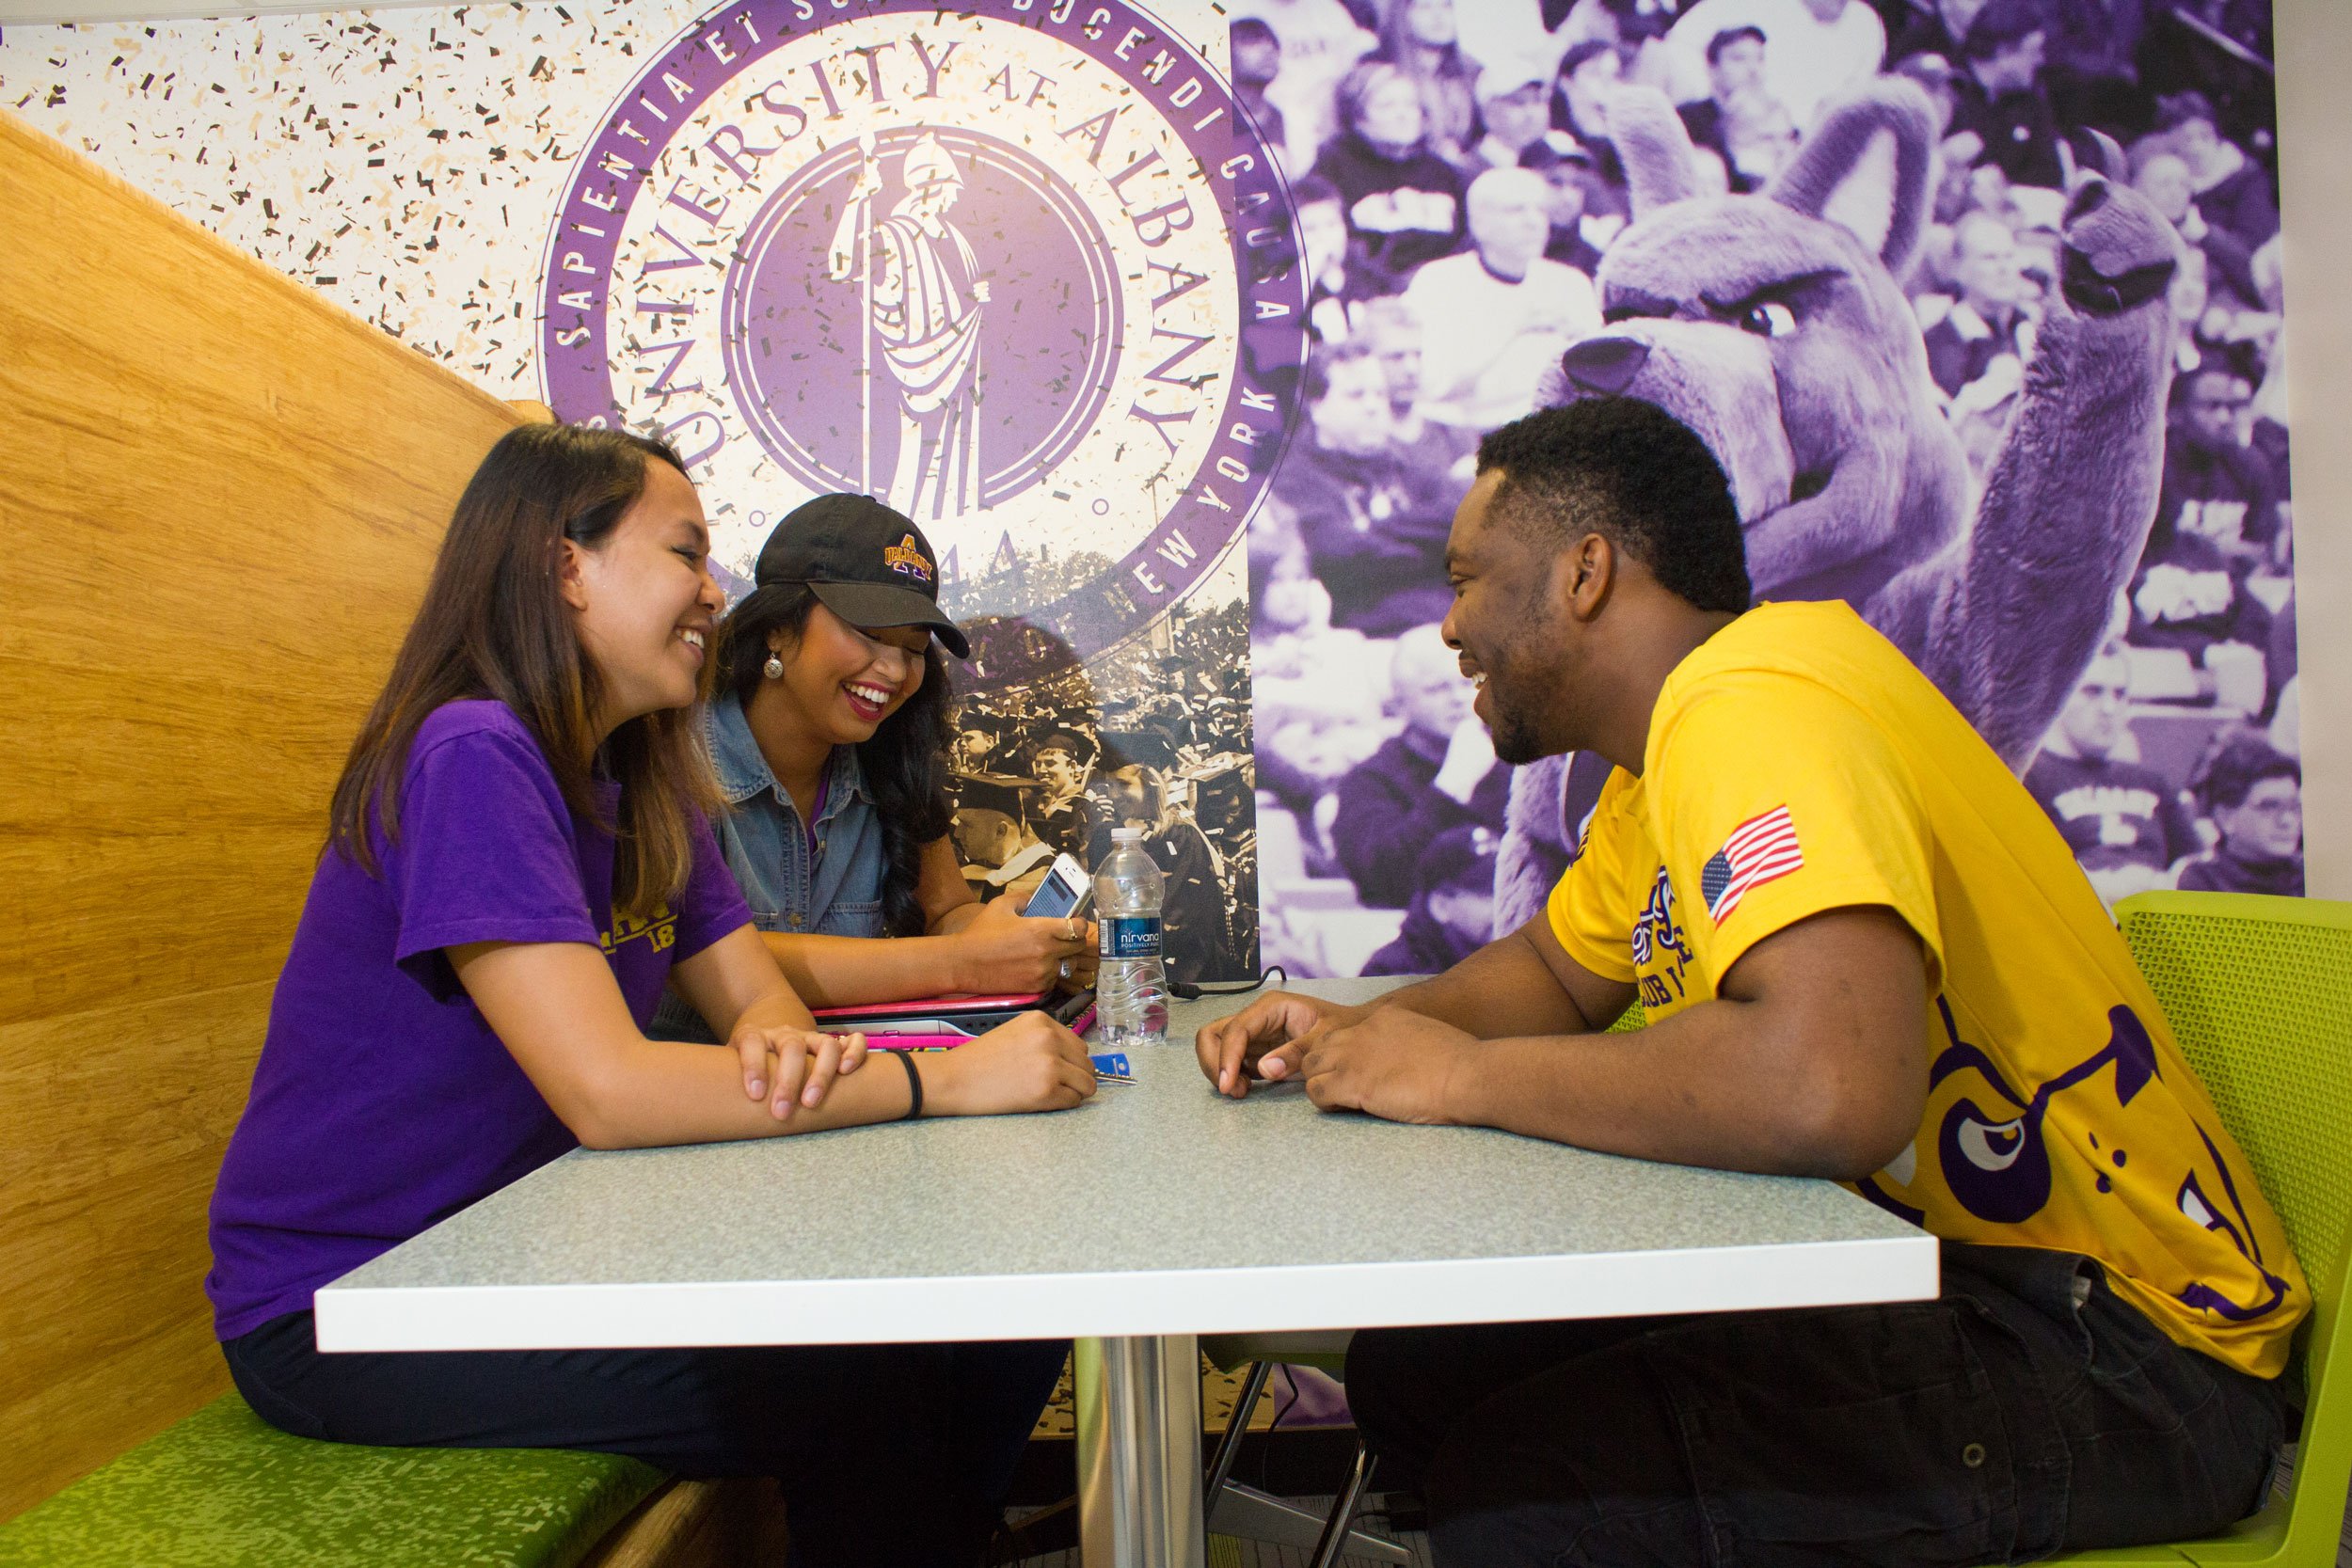 Three laughing students sit at a table with a green chair and bench, with the UAlbany seal on the wall